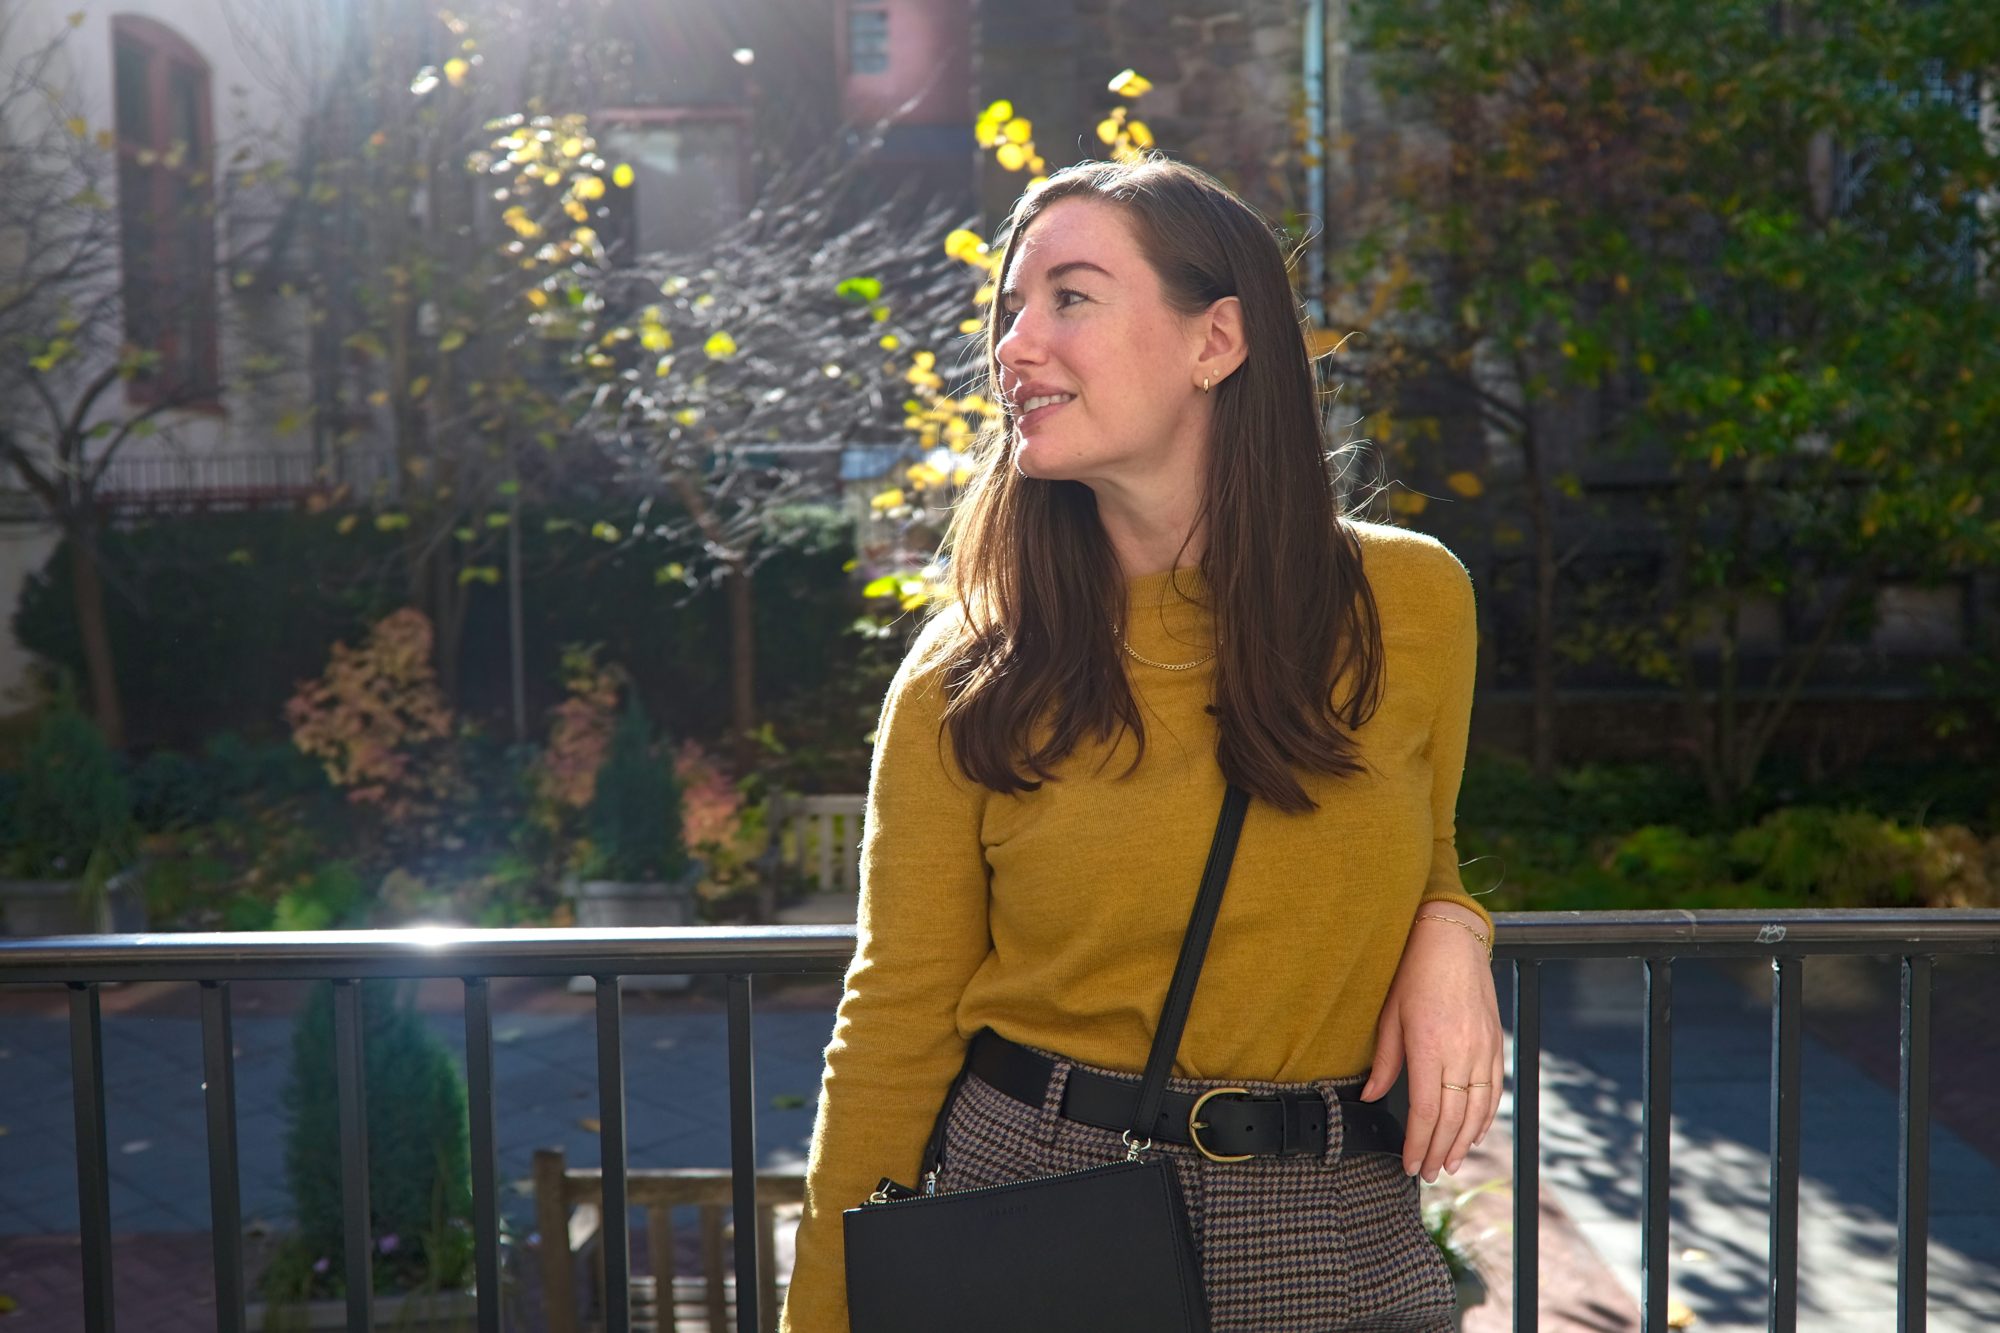 Alyssa wears a mustard sweater with houndstooth pants